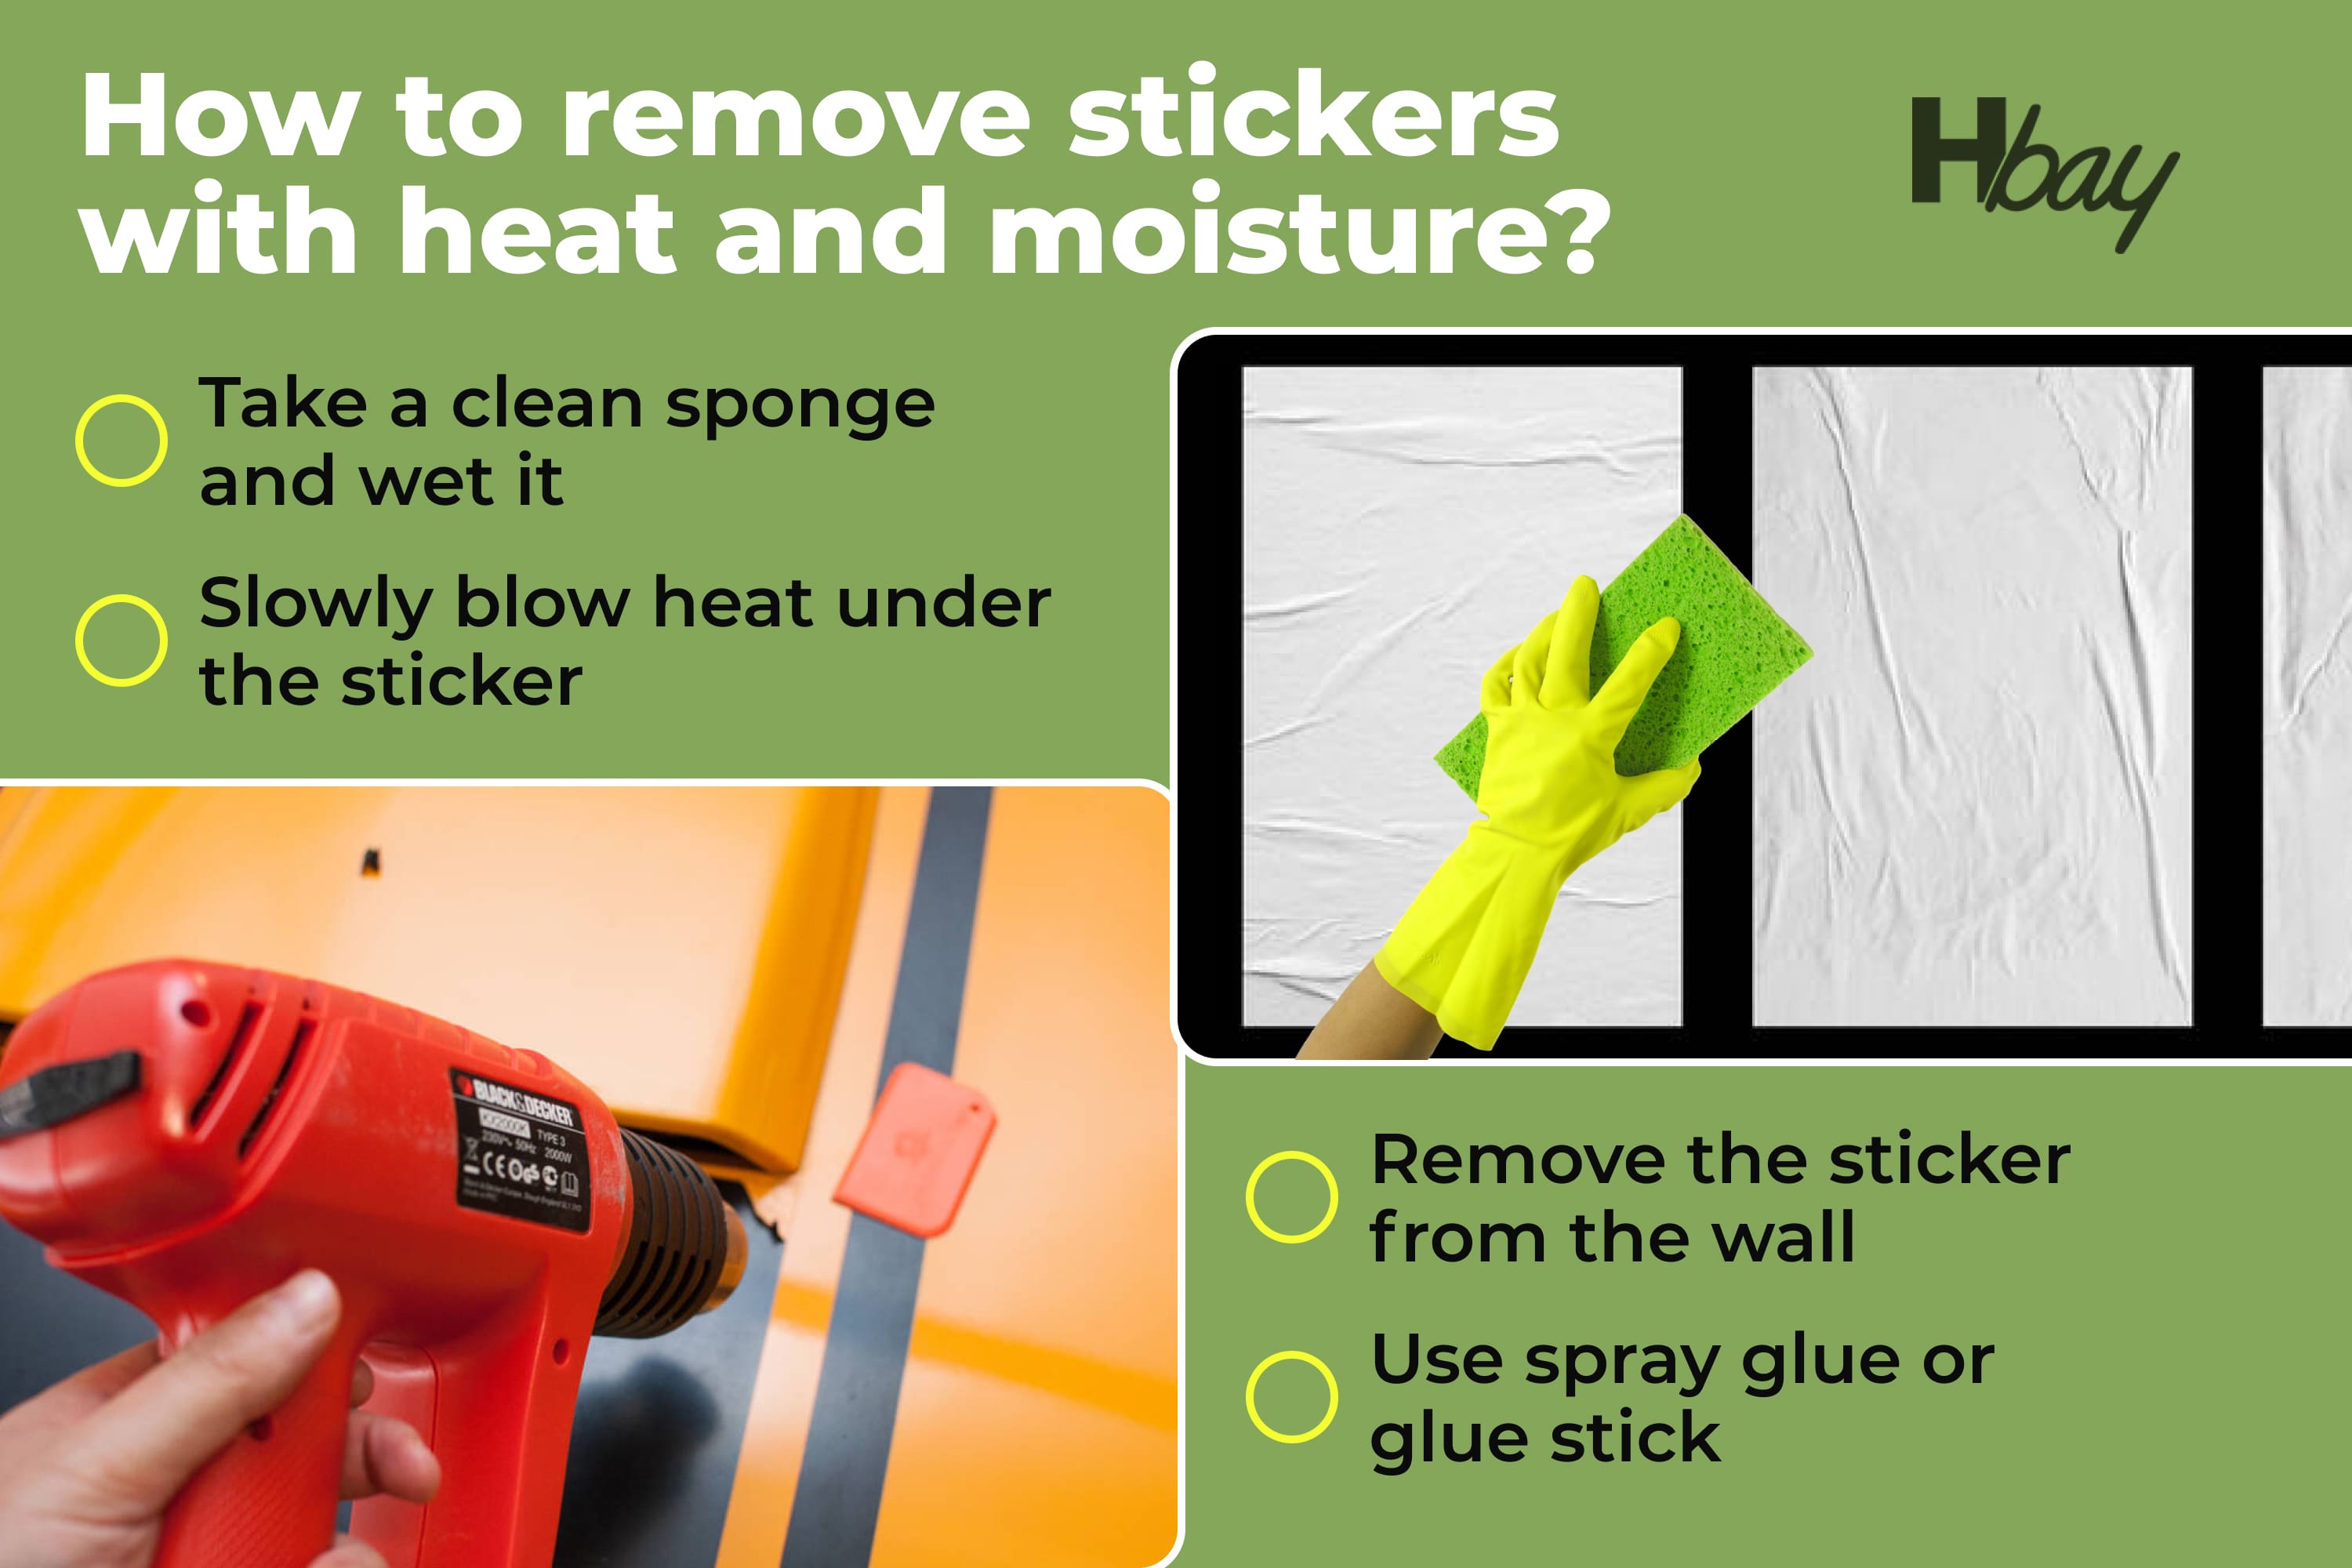 How to remove stickers with heat and moisture